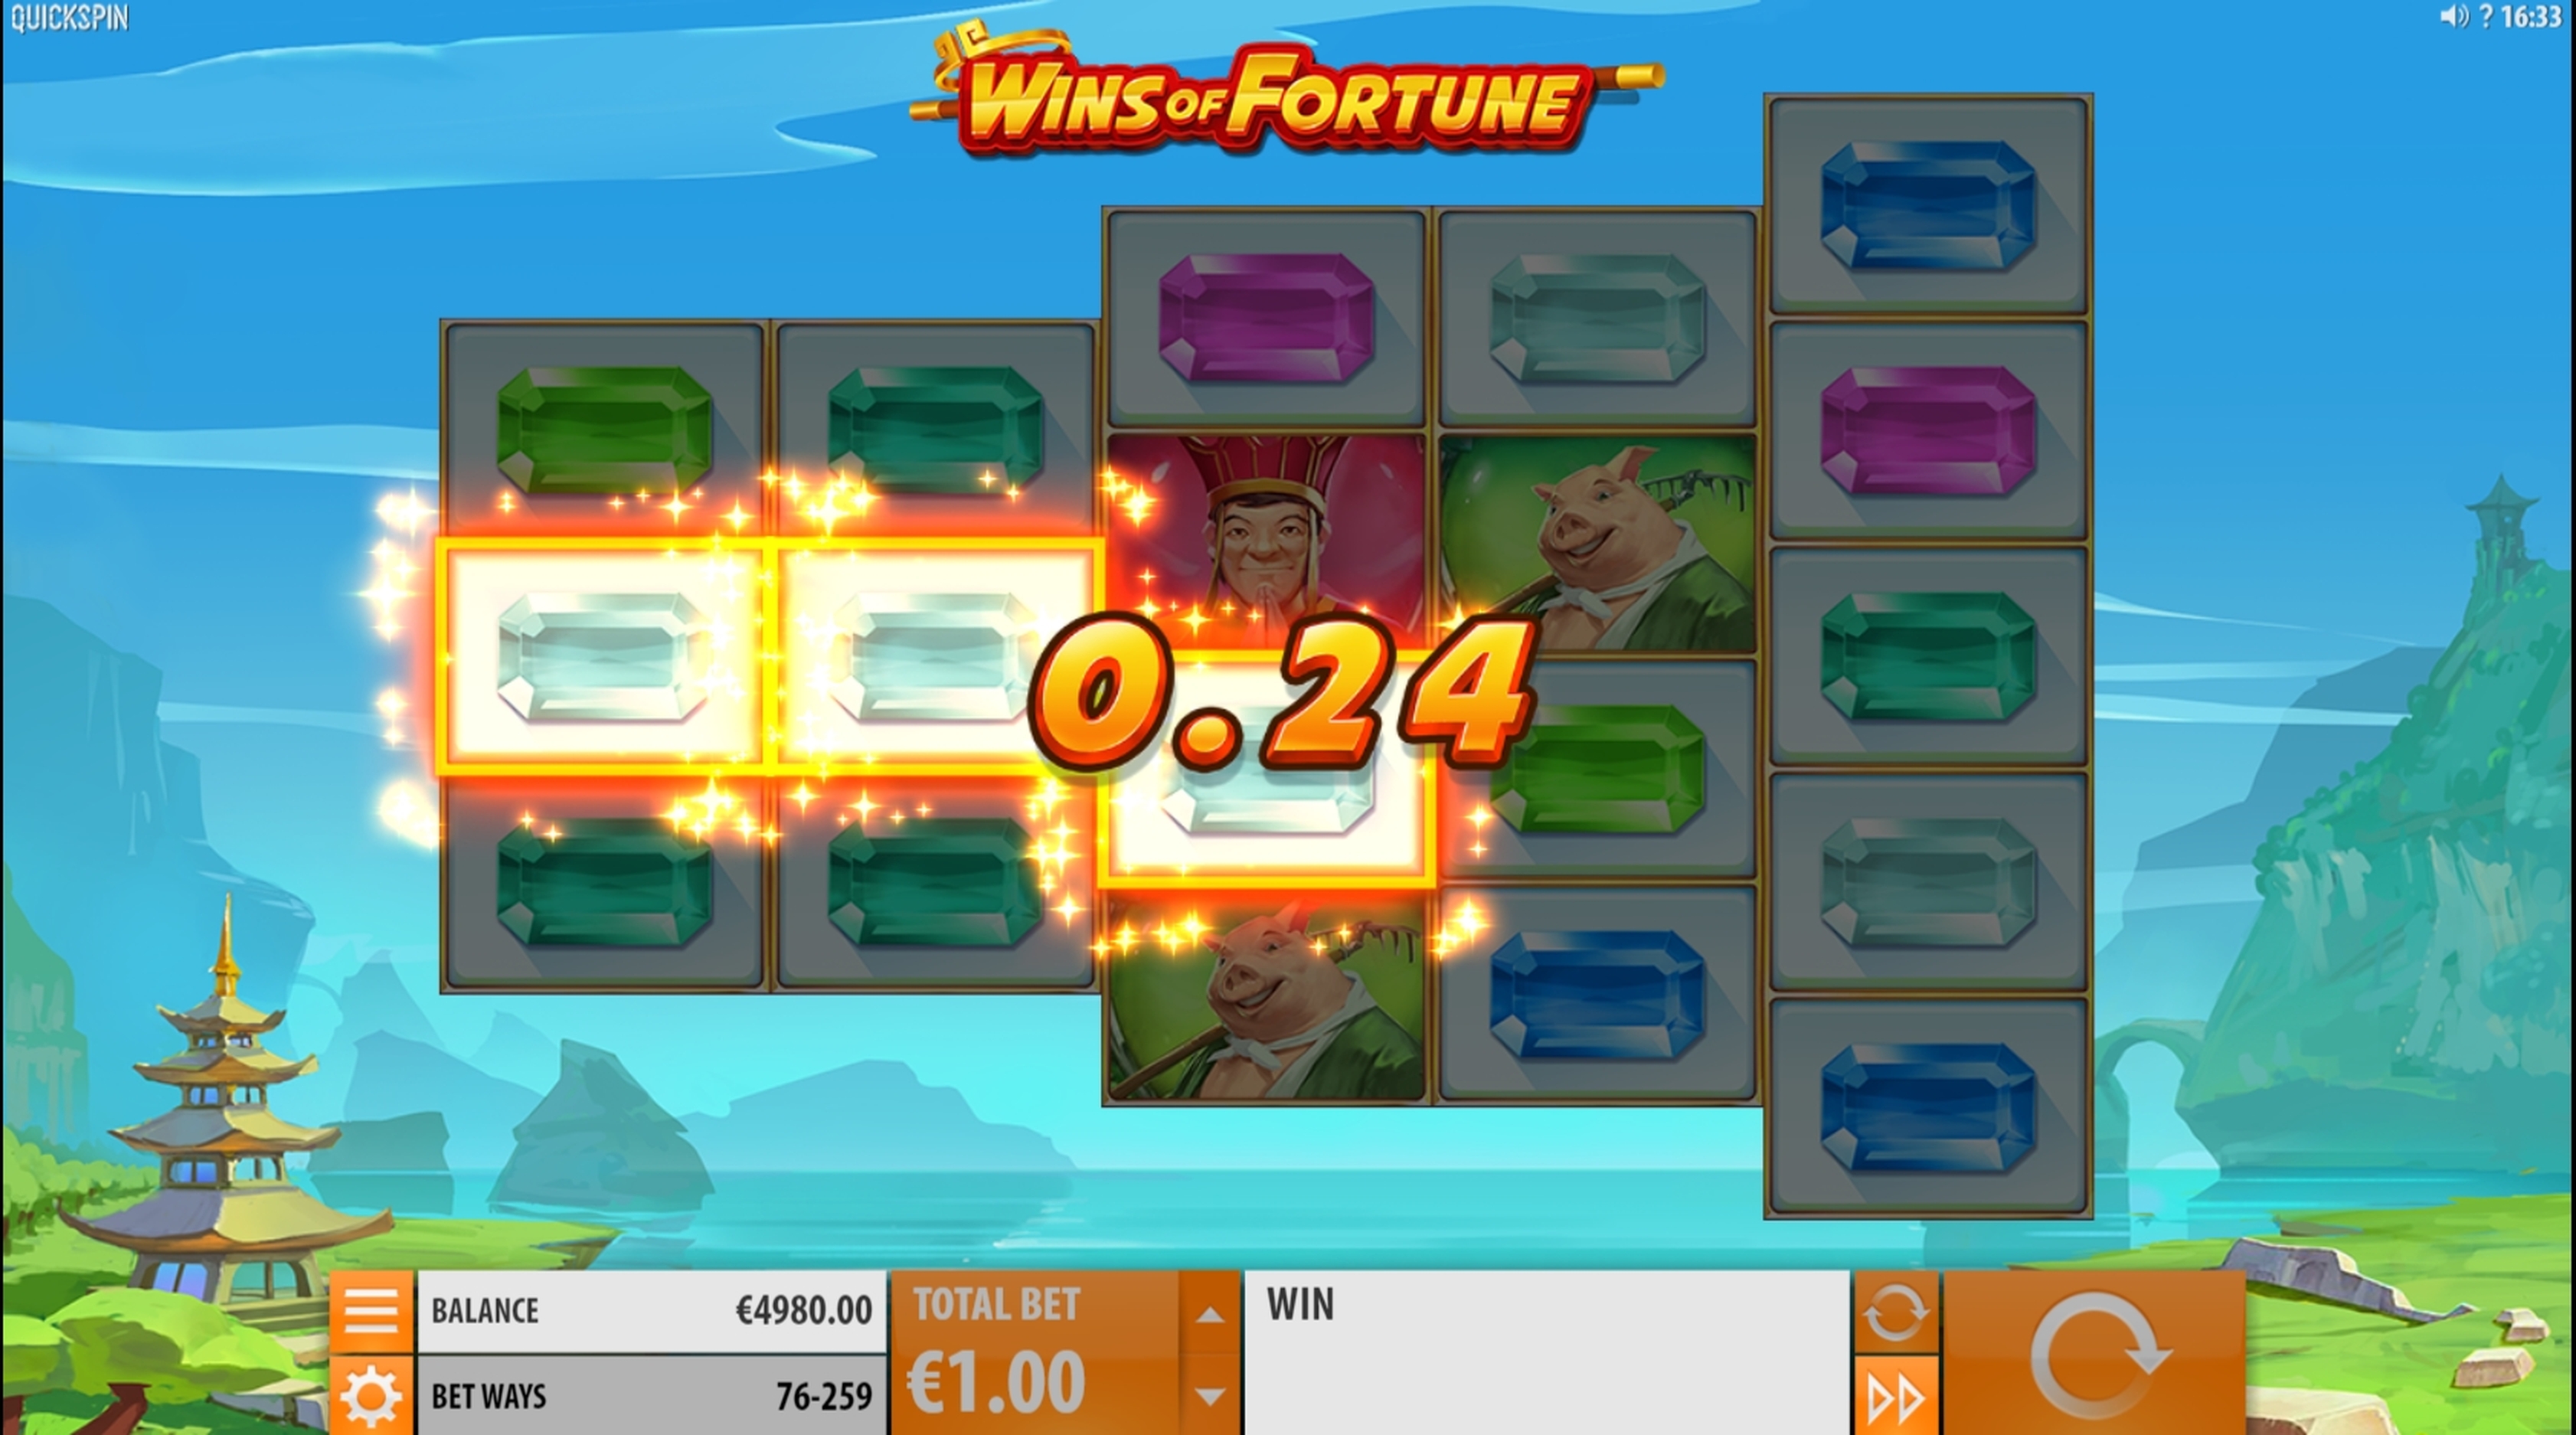 Win Money in Wins of Fortune Free Slot Game by Quickspin